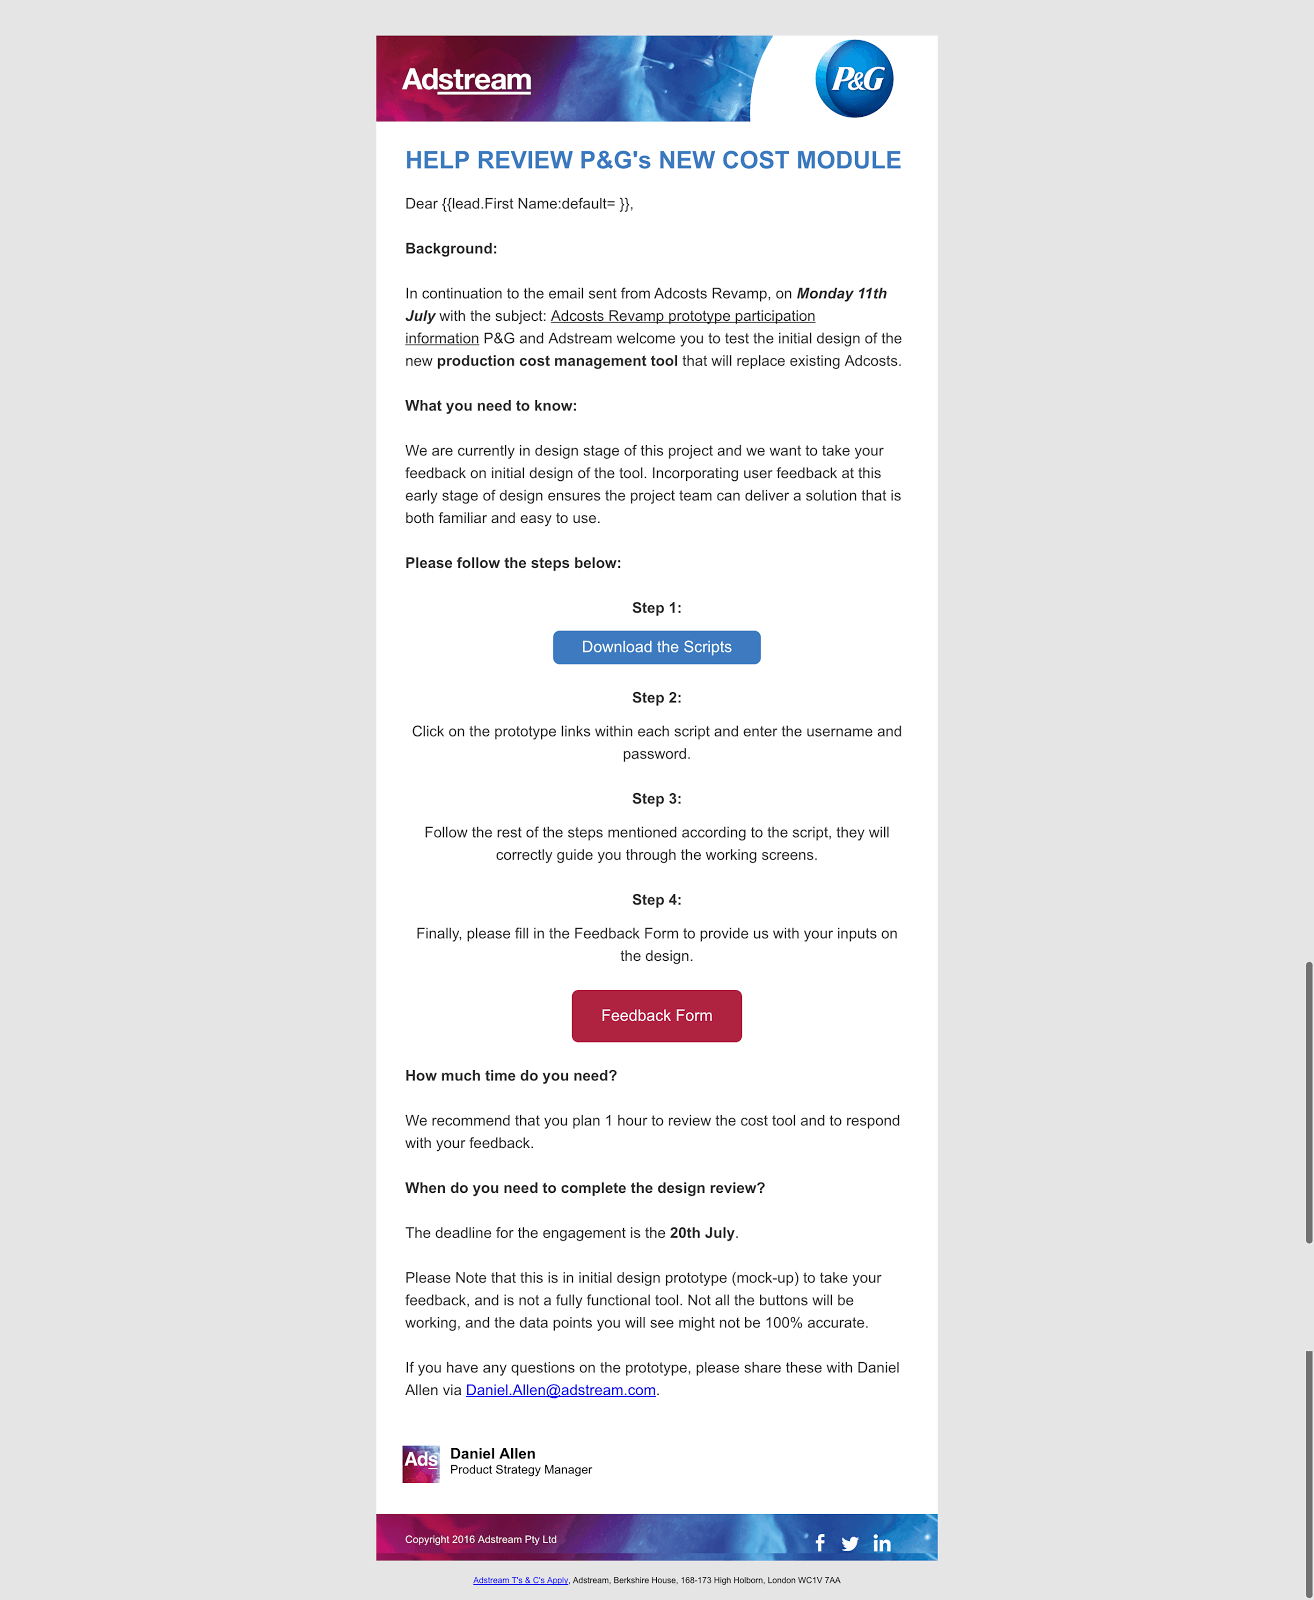 Email sent out to users